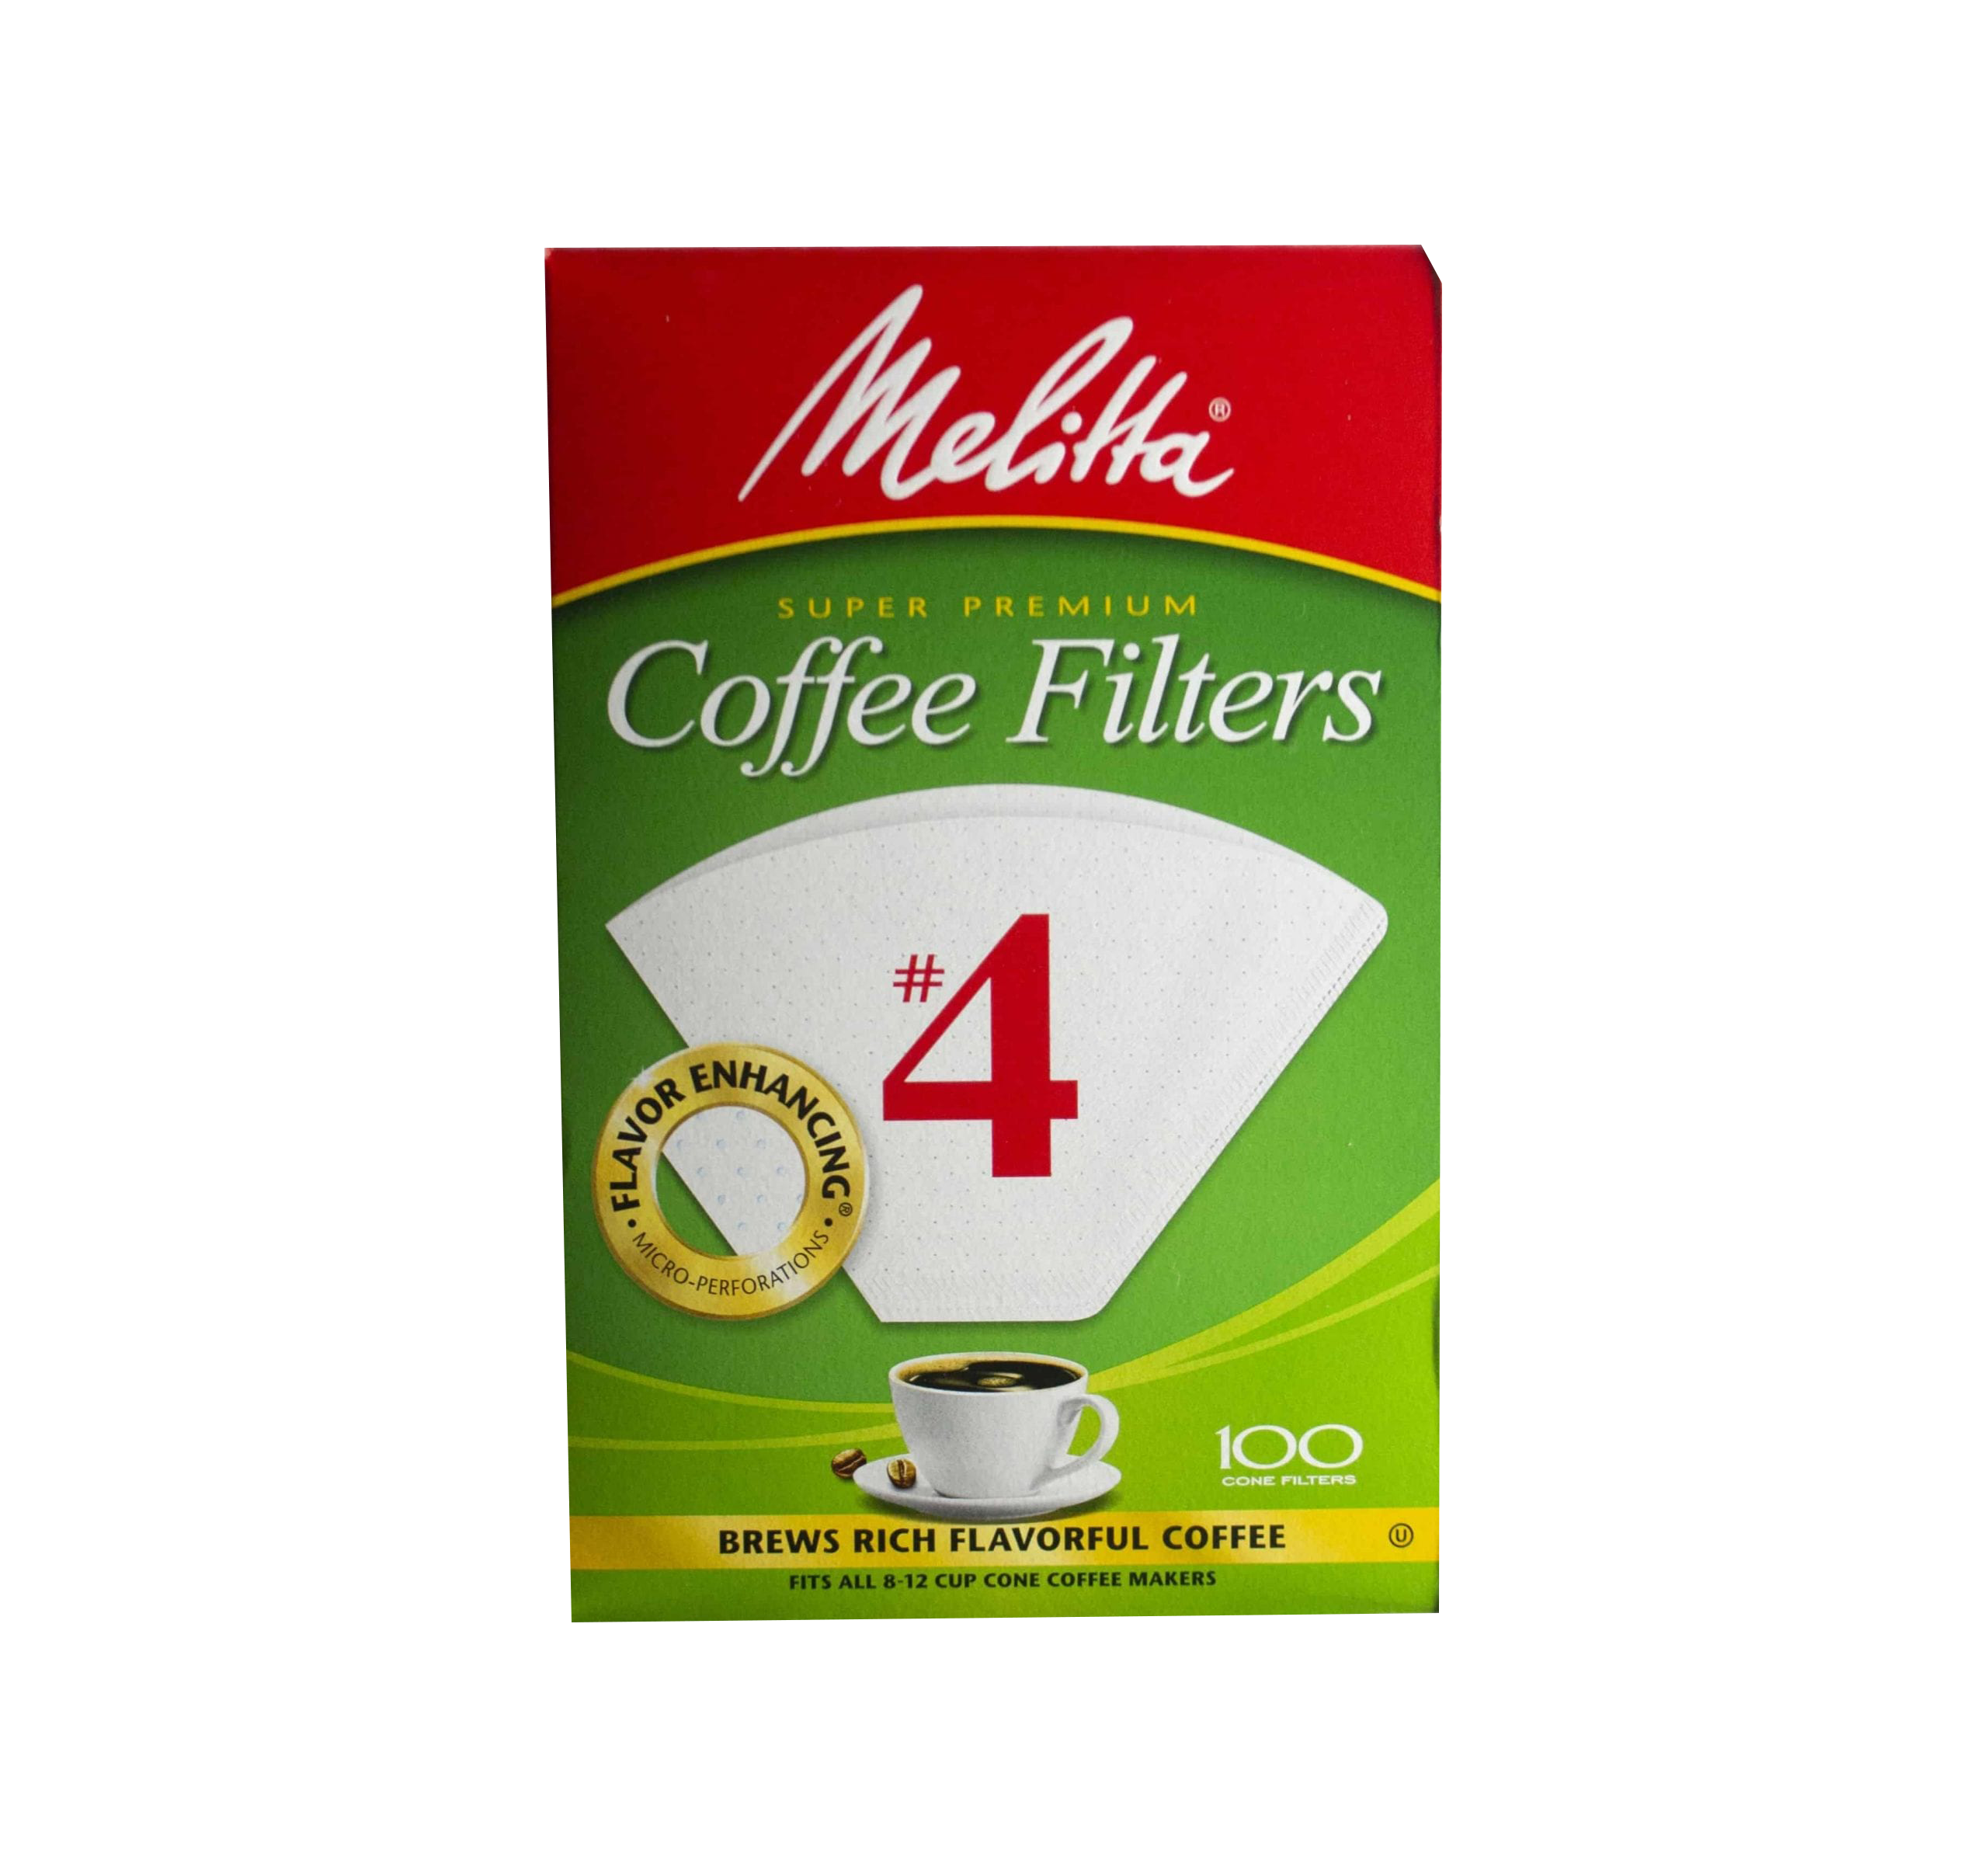 https://cdn.shopify.com/s/files/1/0563/3294/3550/products/Melitta_4filters.png?v=1629844912